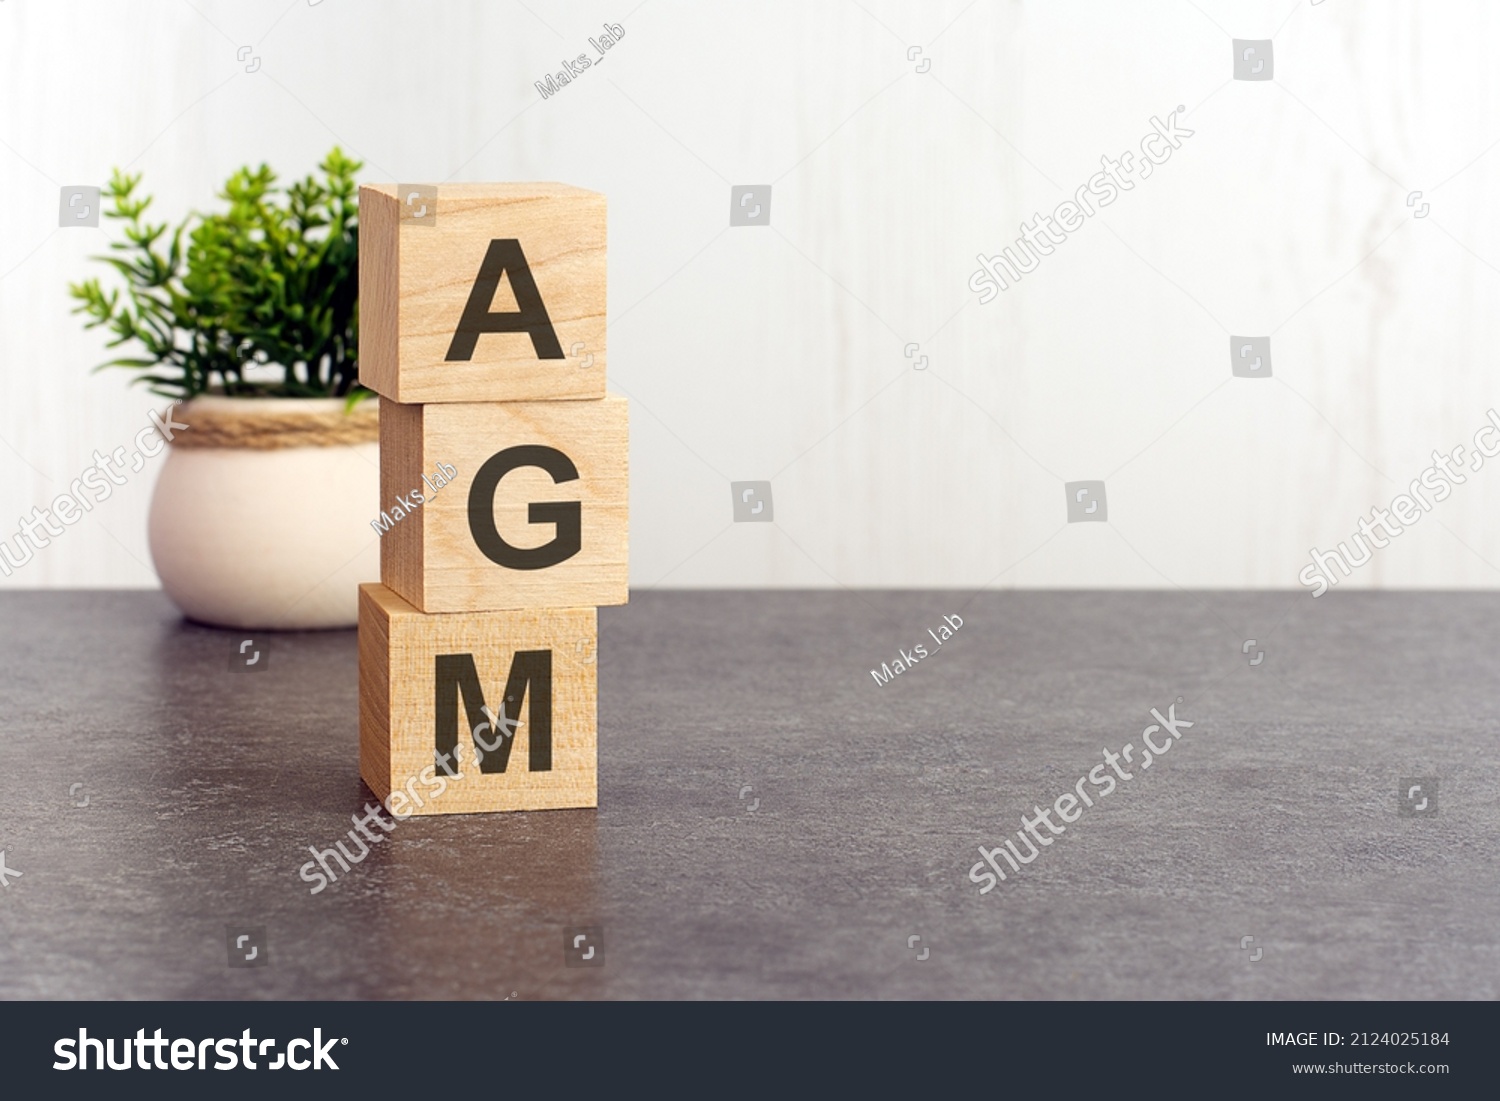 letters of the alphabet of AGM on wooden cubes, green plant on a white background. AGM - short for Annual General Meeting, #2124025184